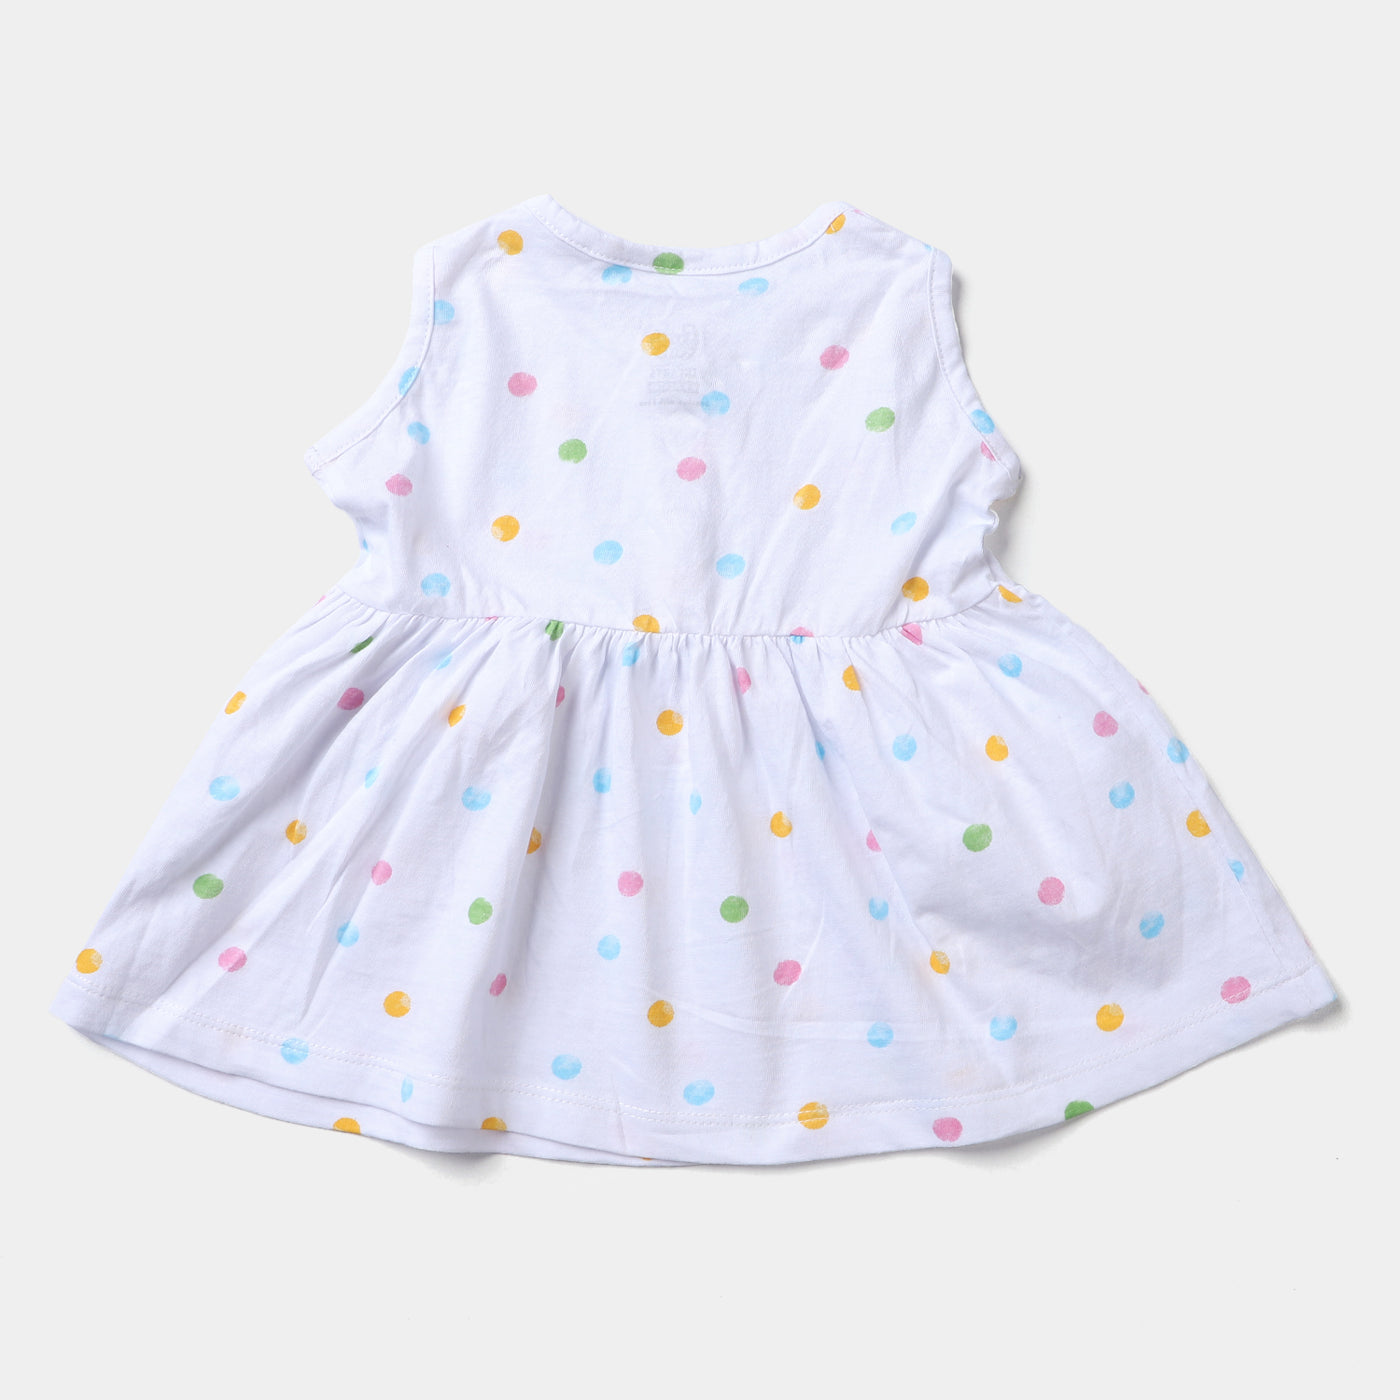 Infant Girls Cotton Terry Knitted Frock Polka Dots-Printed